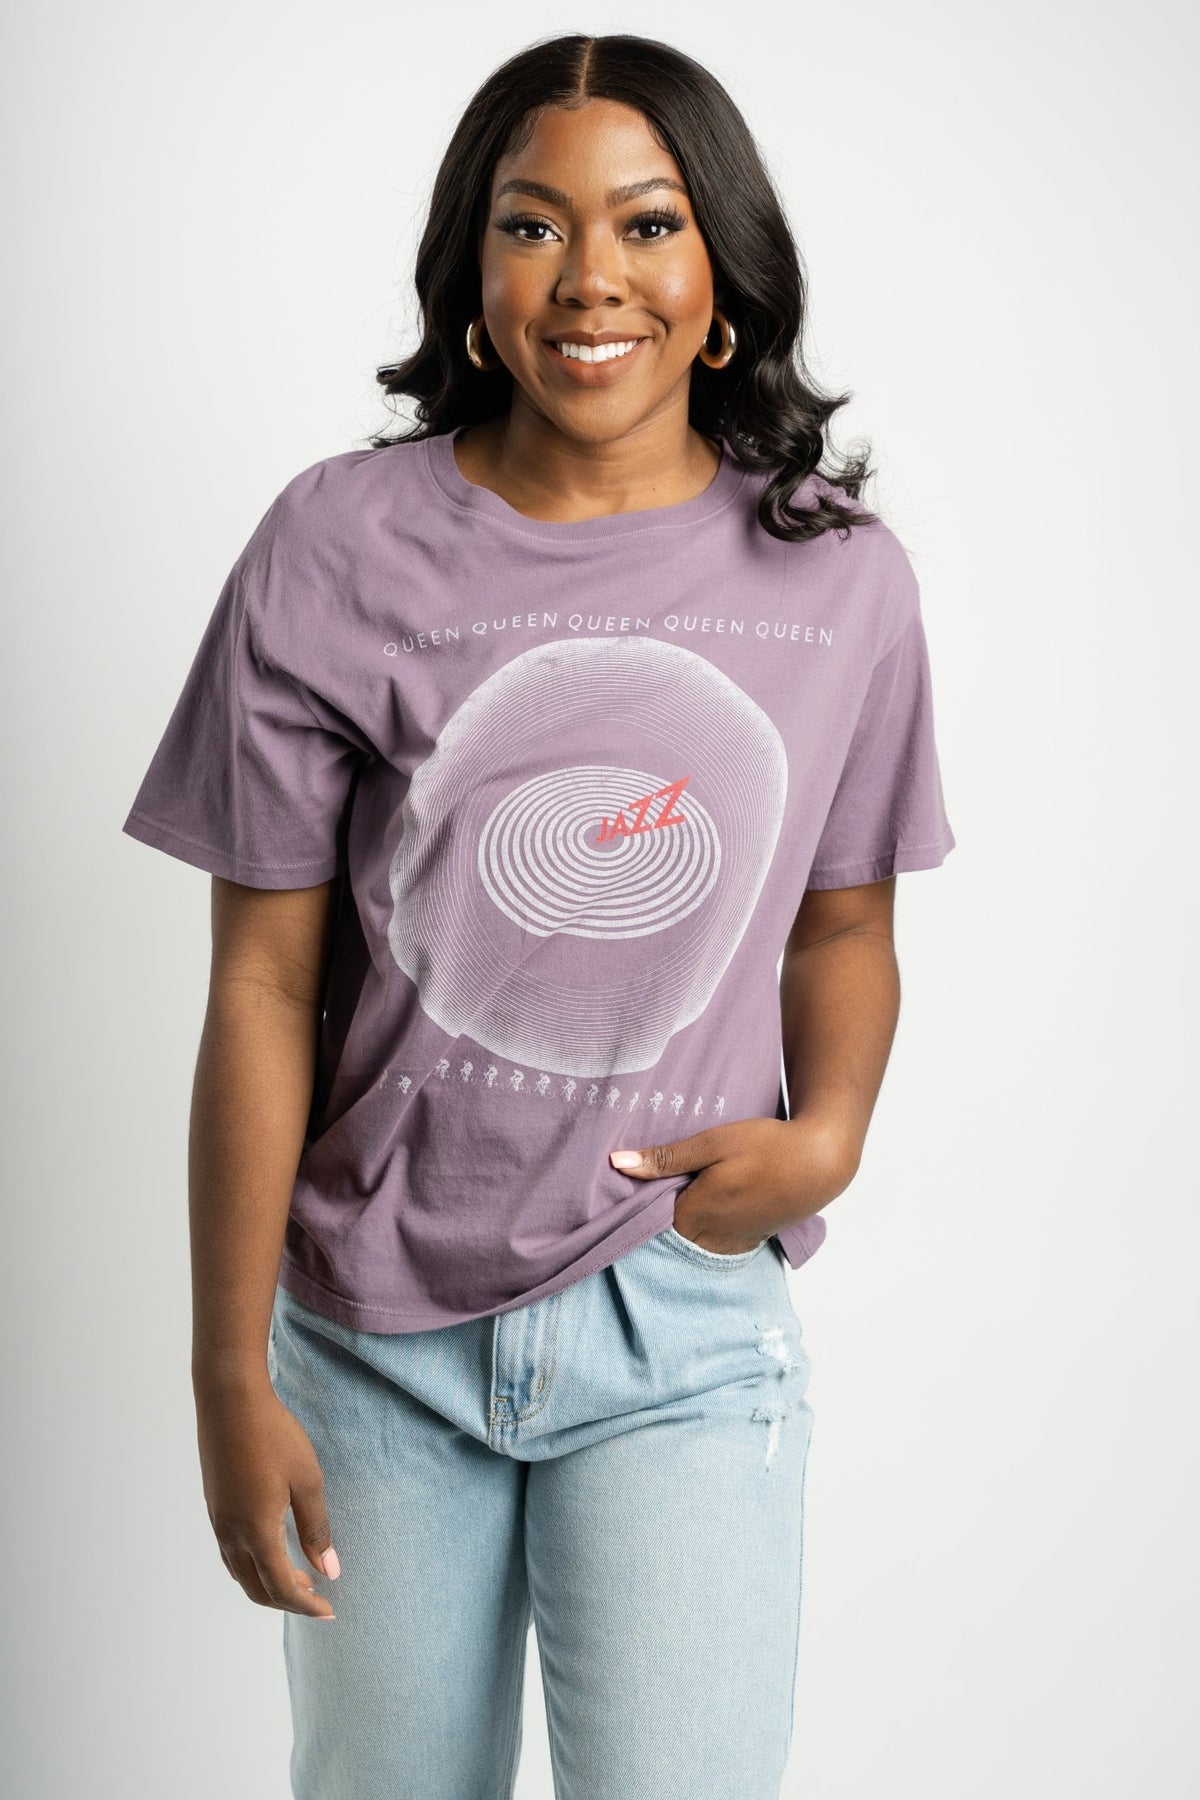 DayDreamer Queen Jazz boyfriend tee purple sage - Trendy Band T-Shirts and Sweatshirts at Lush Fashion Lounge Boutique in Oklahoma City